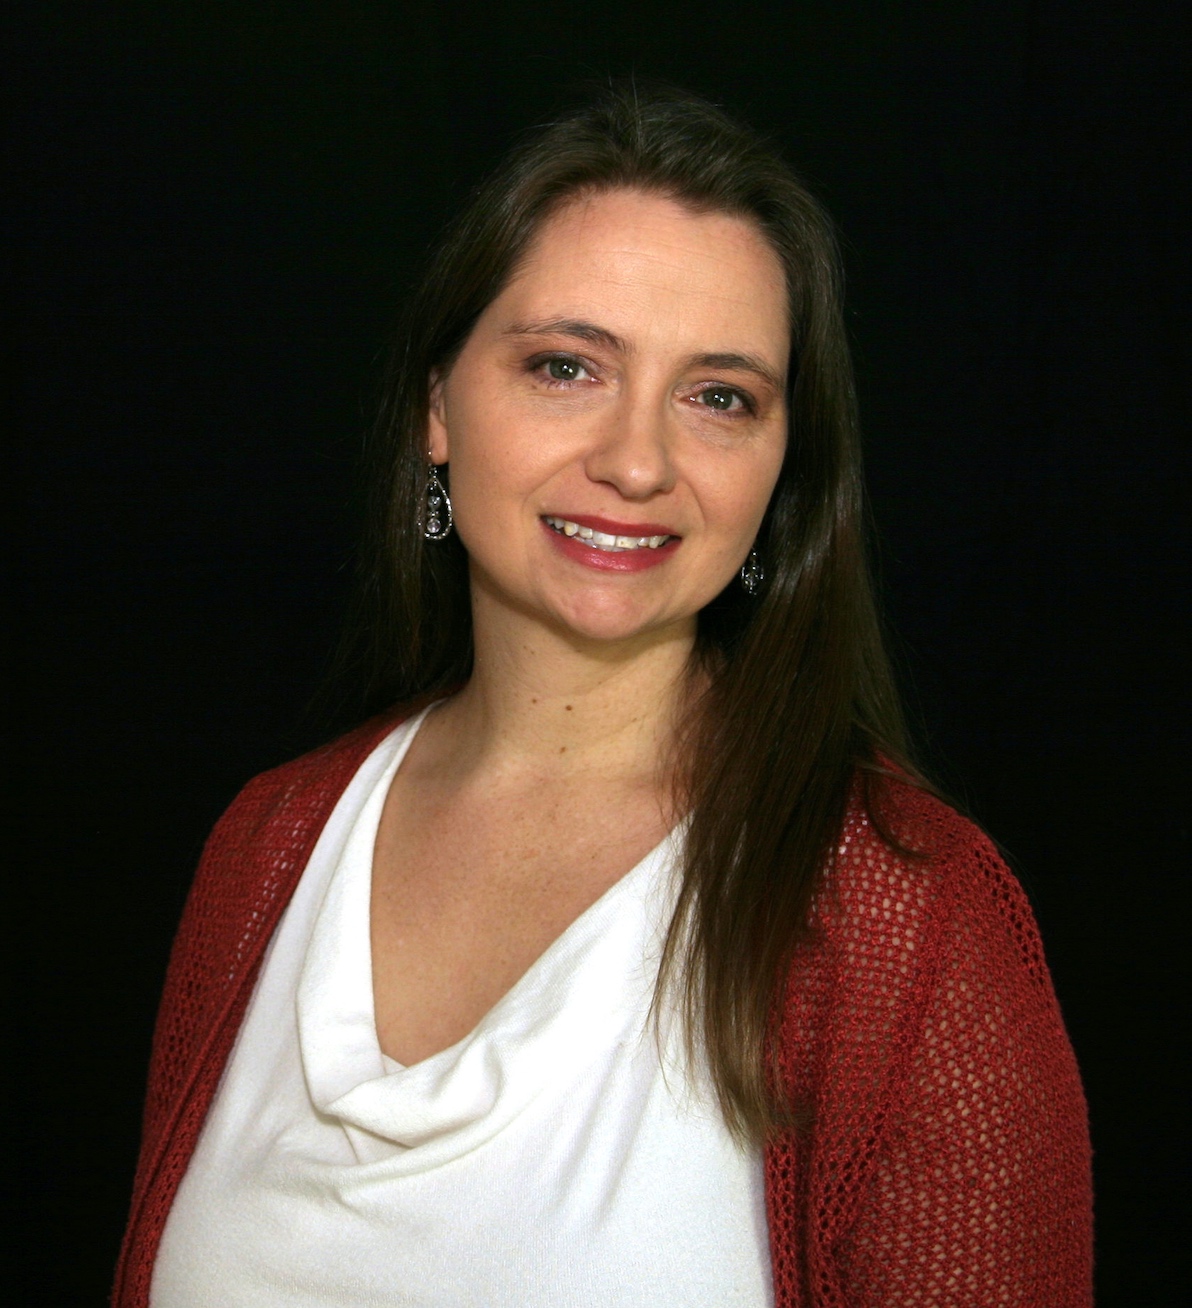 Image of Aubrey Schmalle, author of Body Activated Learning framework